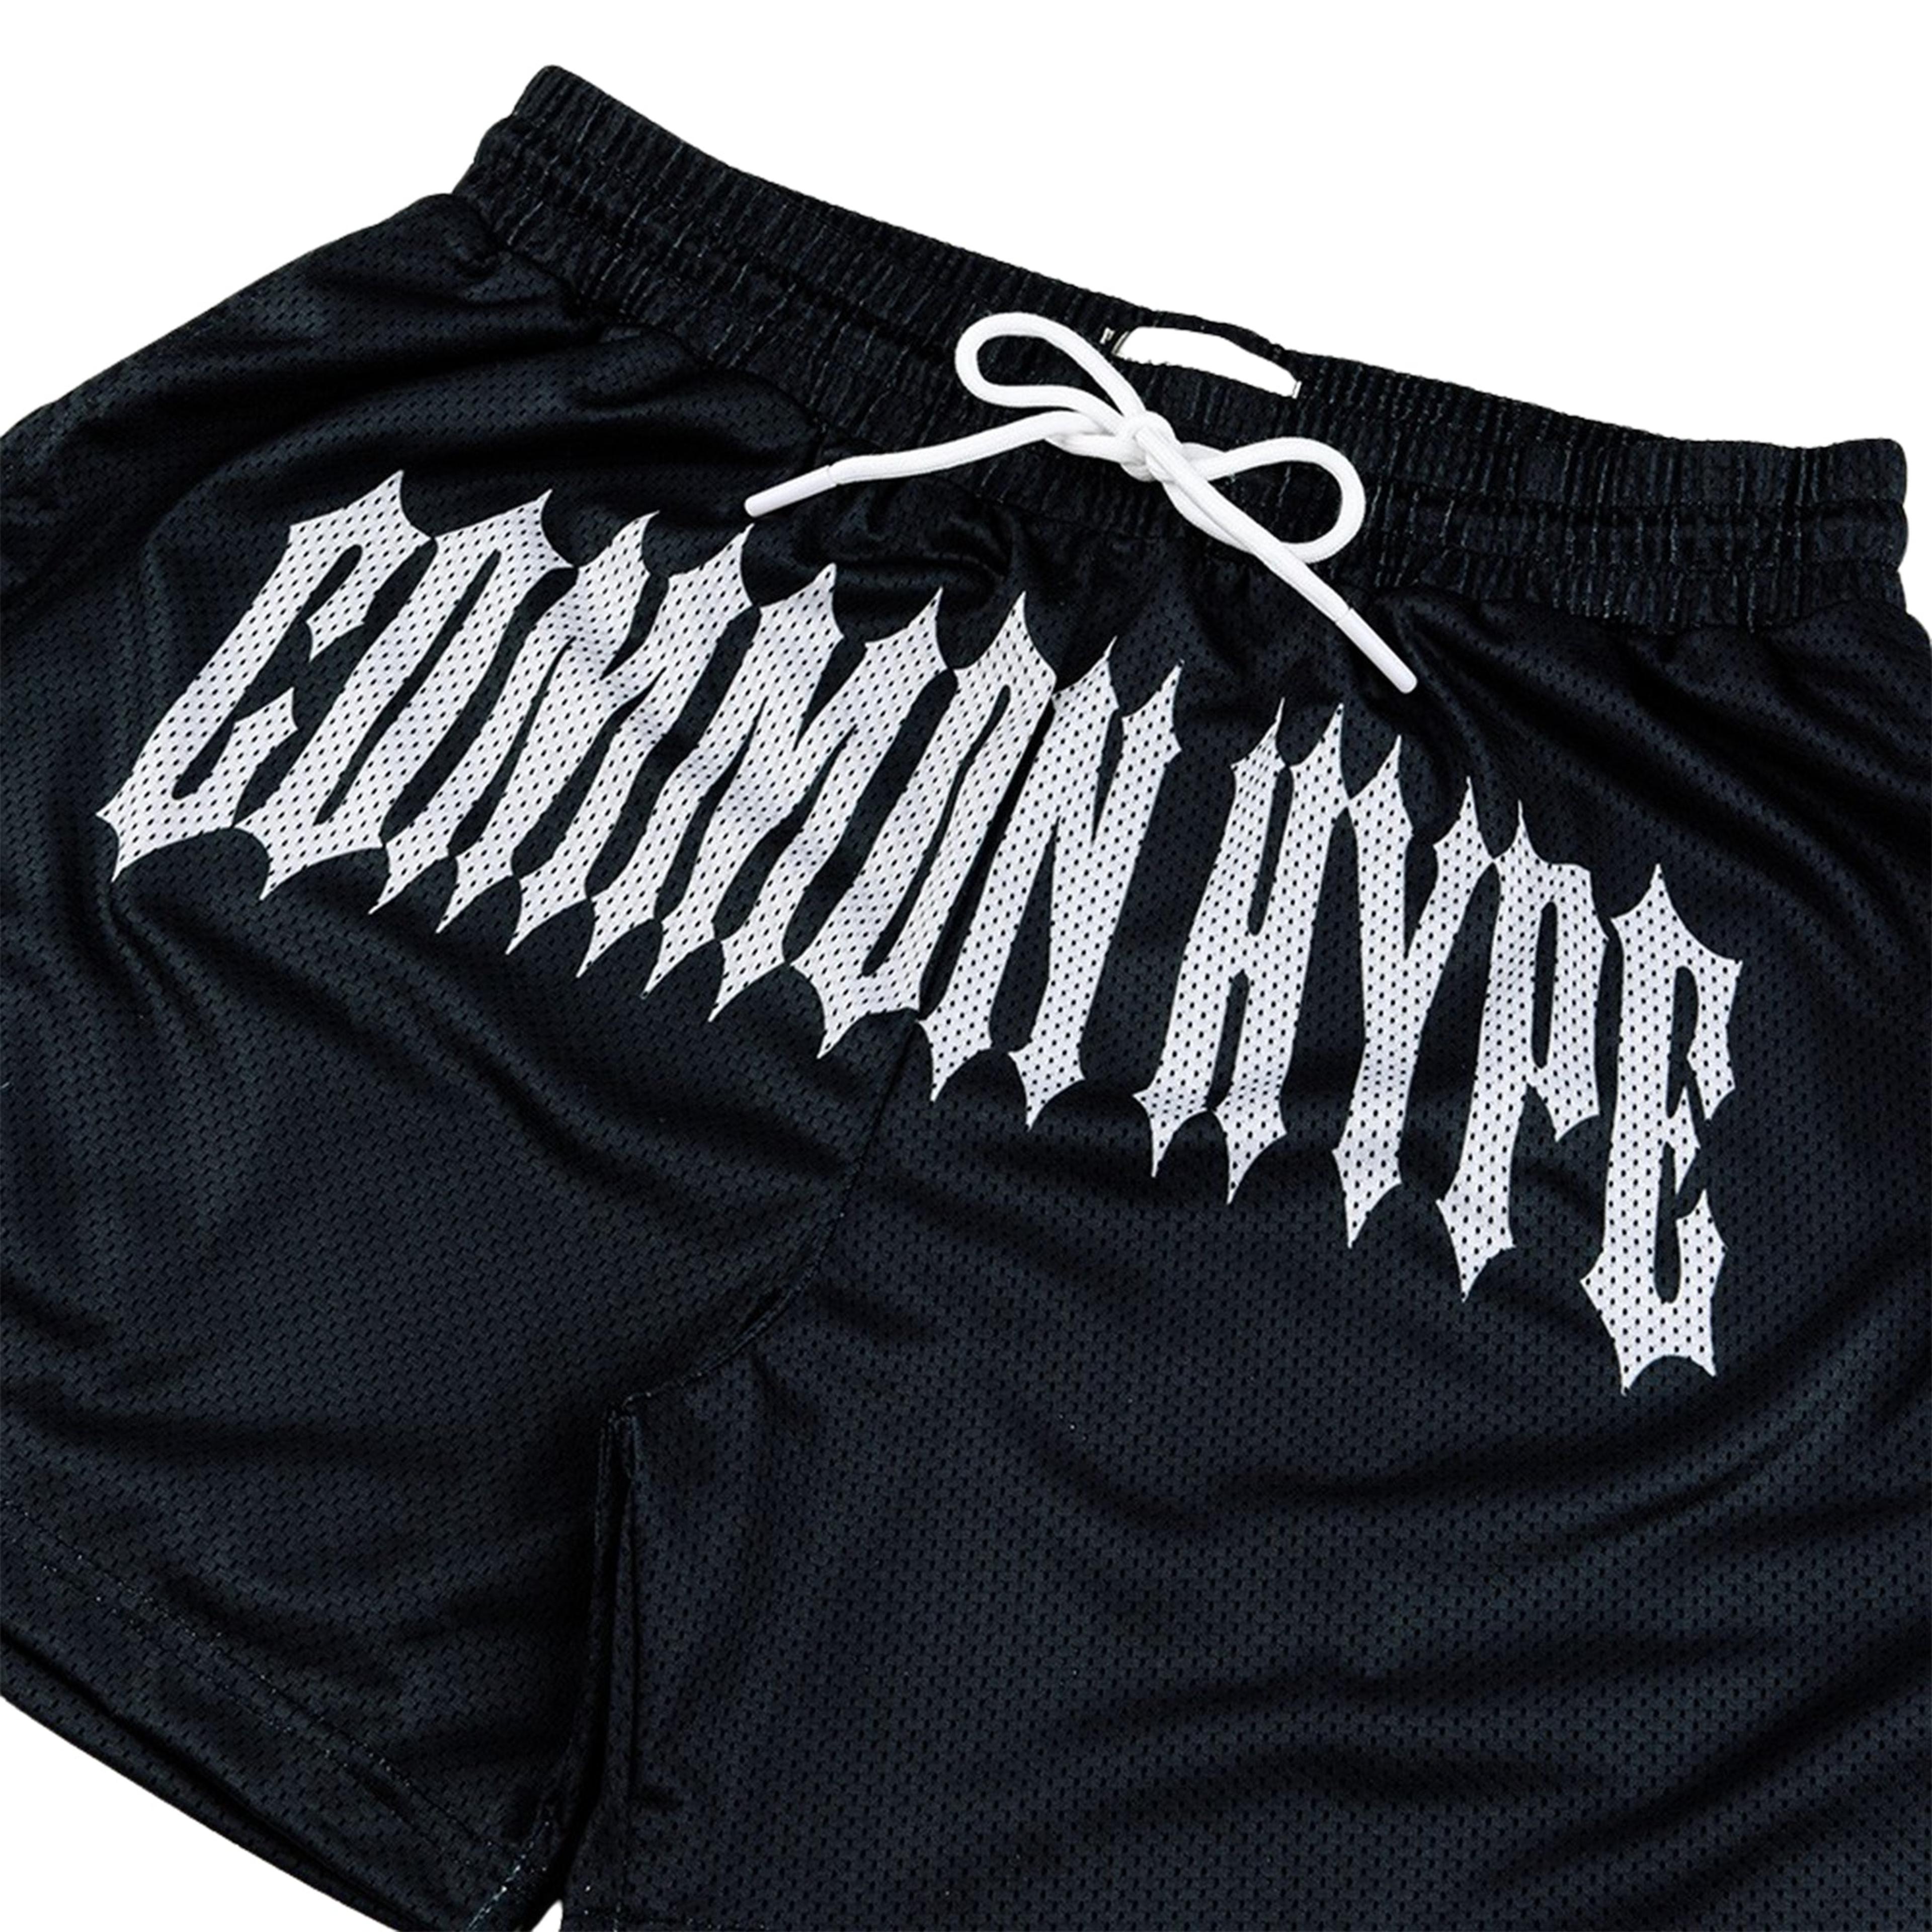 Alternate View 1 of Common Hype Black Old English Short